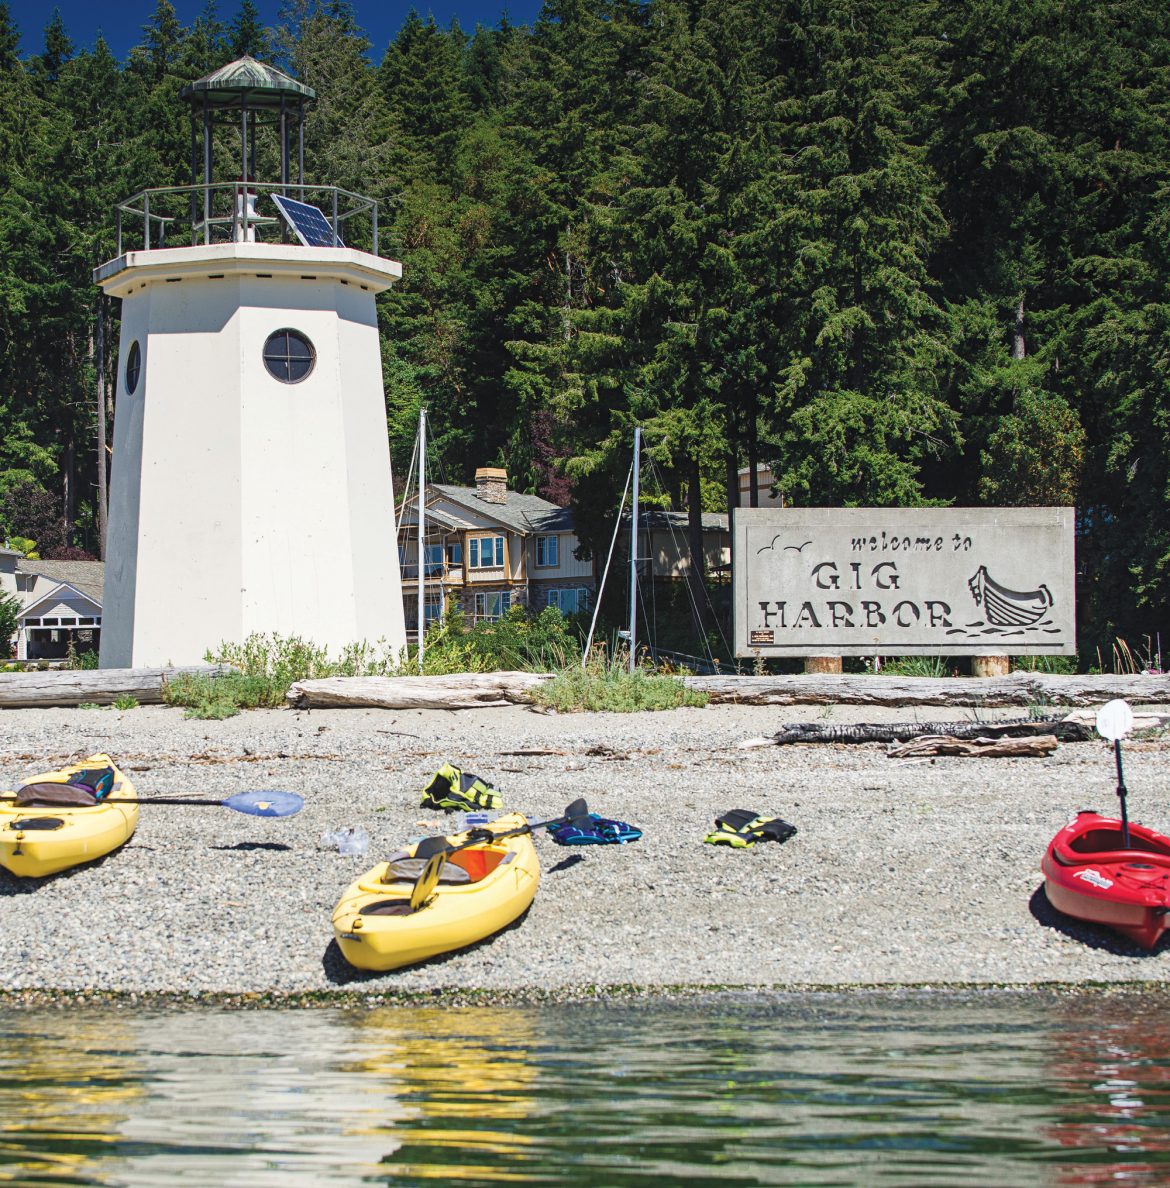 One of the best ways to spend a summer day in Gig Harbor is by renting a kayak or paddleboard and hitting the water.